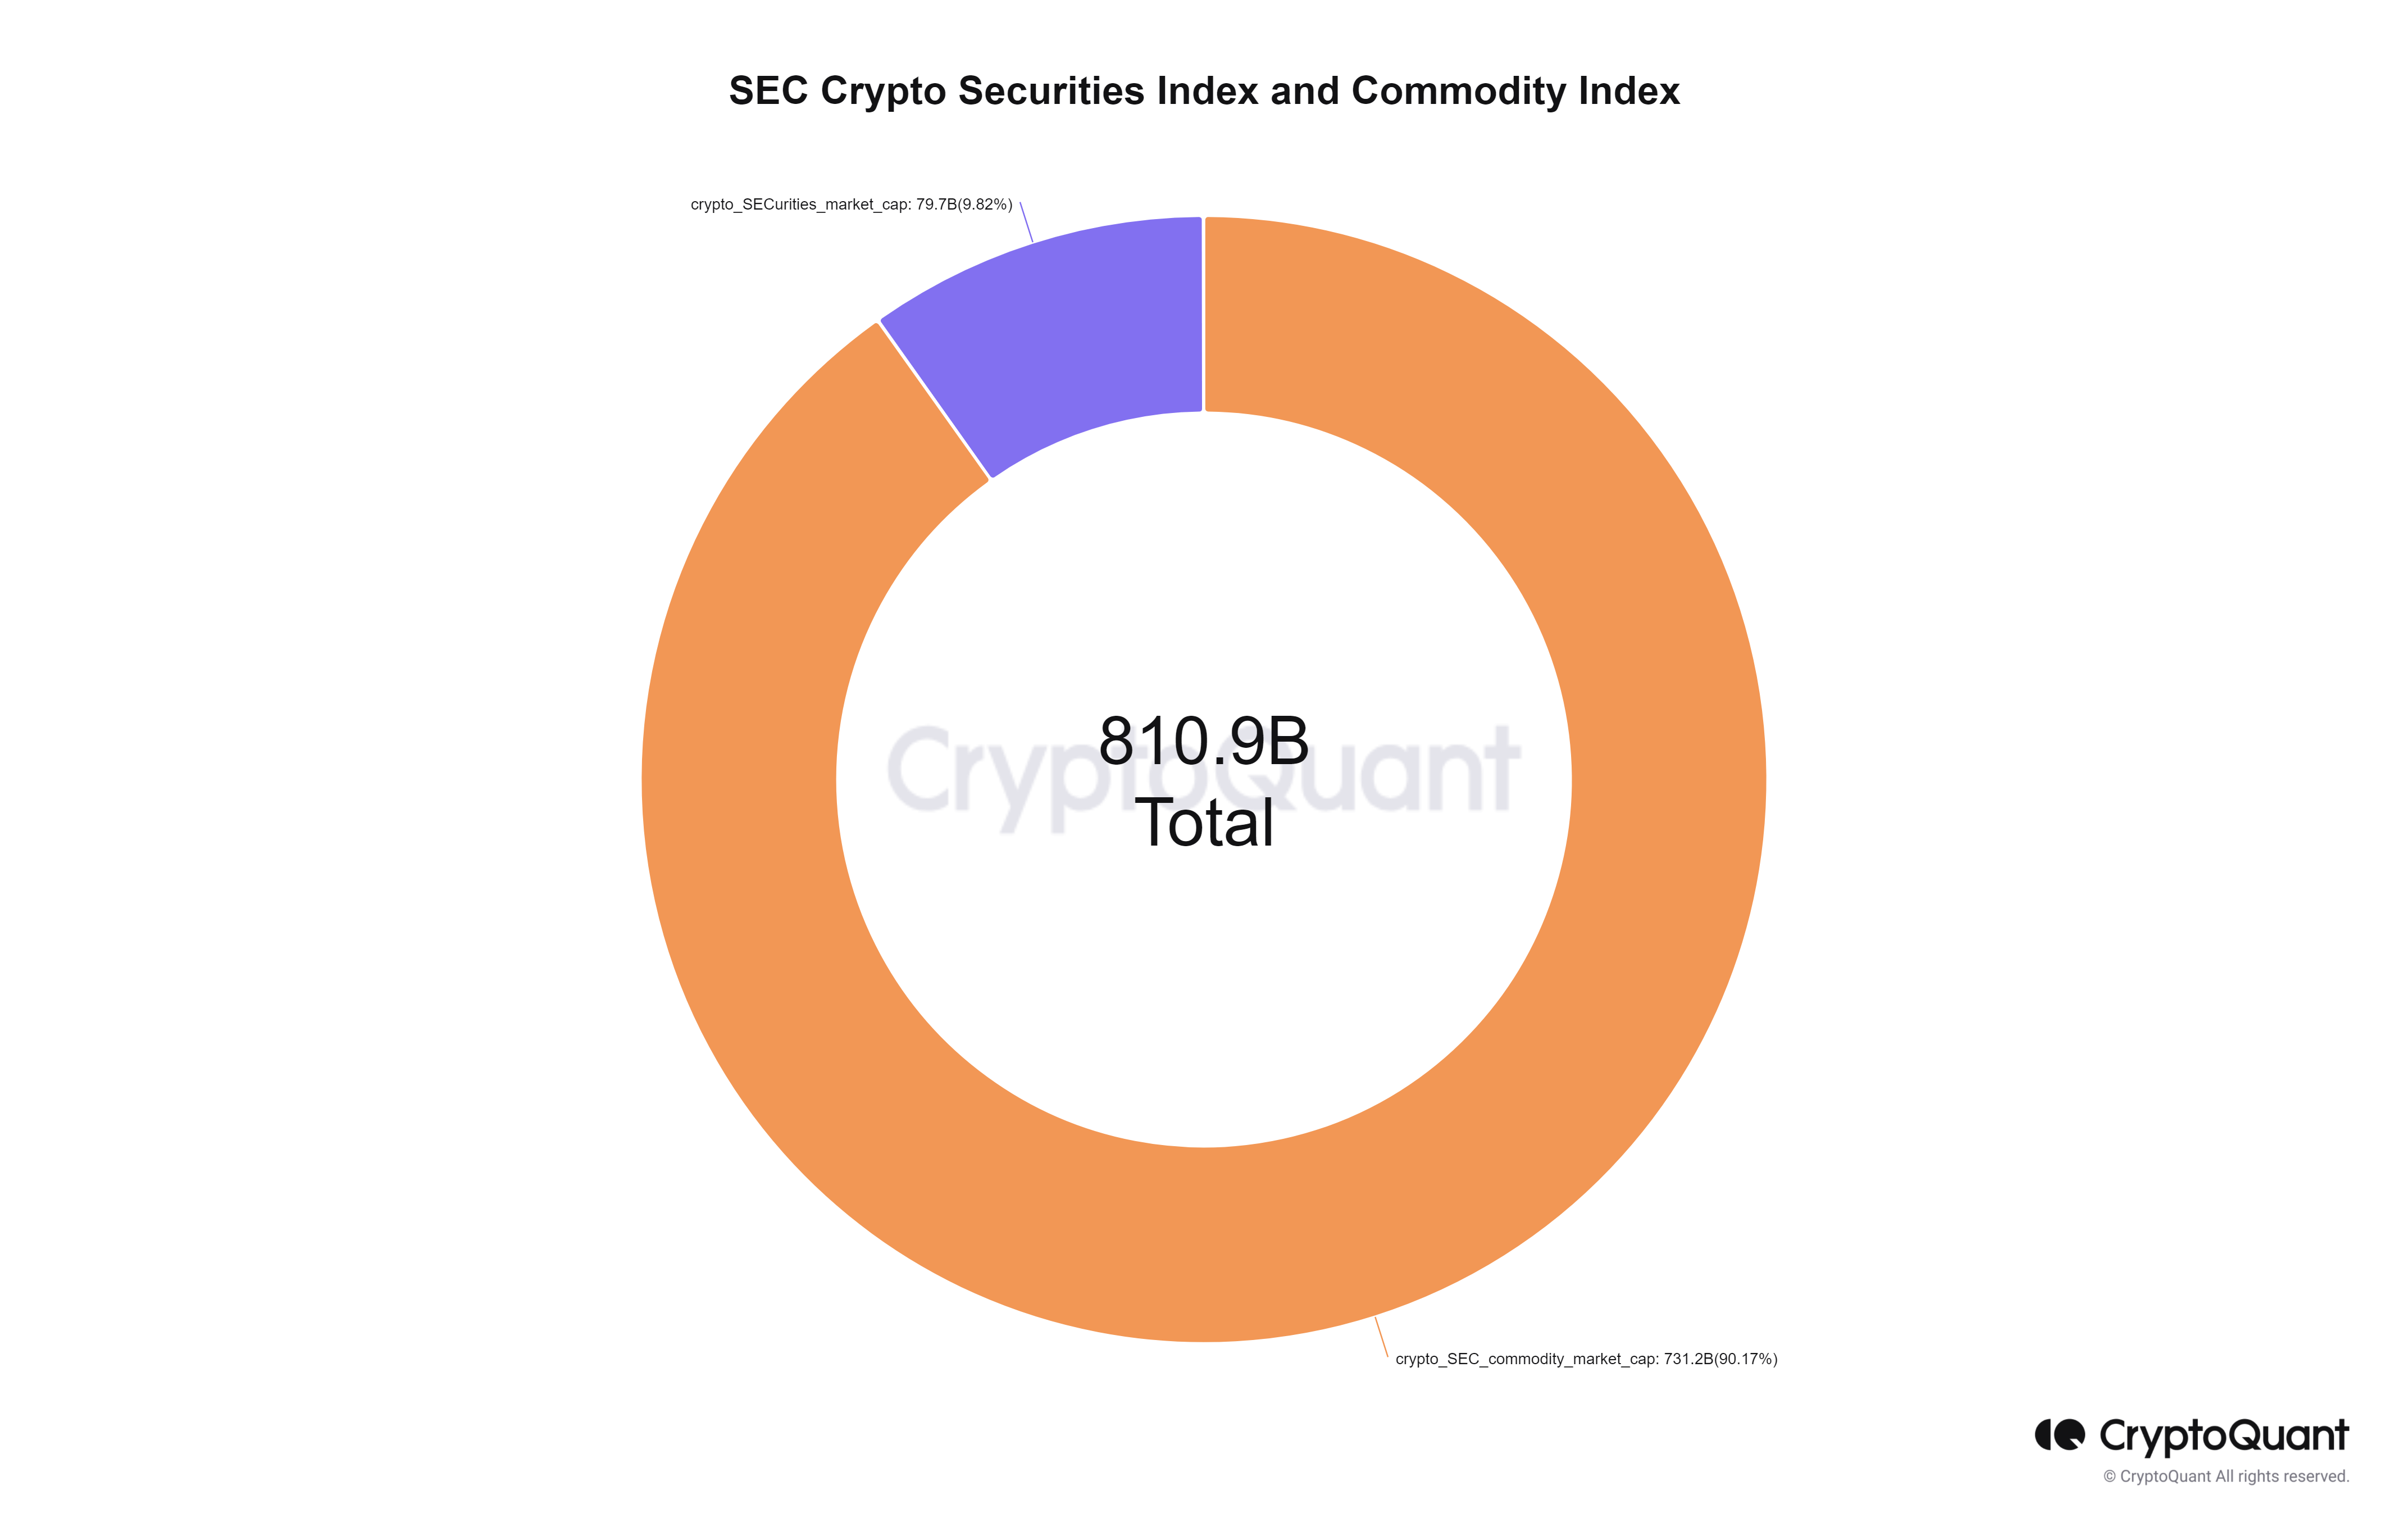 Securities and commodities: (Source: Crypto Quant)